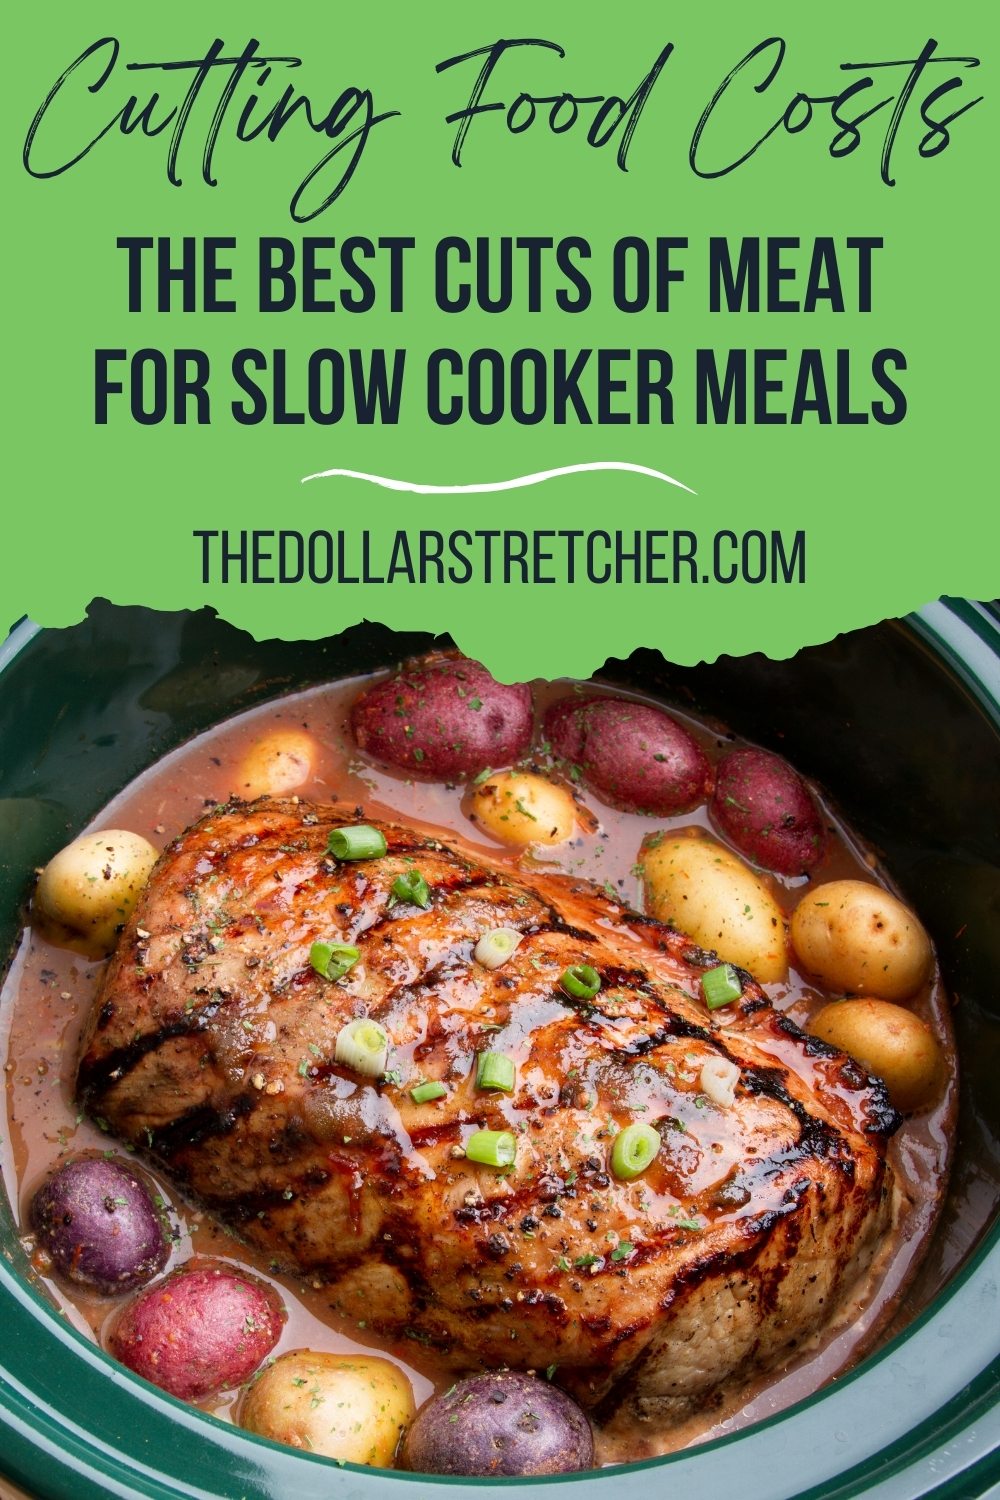 The Best Cuts of Meat for Slow Cooker Meals PIN